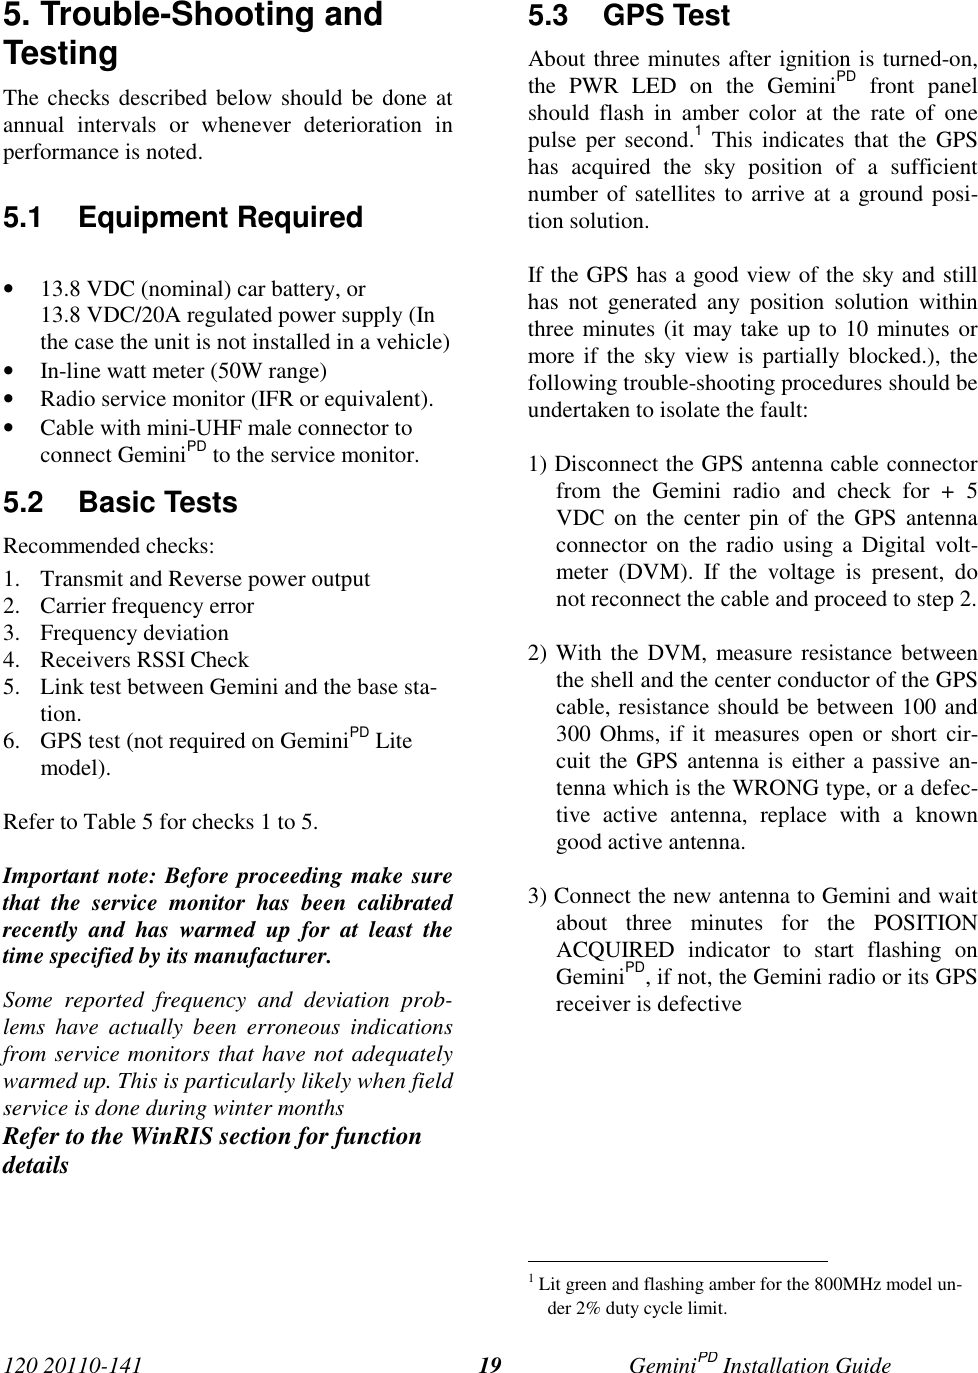 120 20110-141 GeminiPD Installation Guide195. Trouble-Shooting andTestingThe checks described below should be done atannual intervals or whenever deterioration inperformance is noted.5.1 Equipment Required• 13.8 VDC (nominal) car battery, or13.8 VDC/20A regulated power supply (Inthe case the unit is not installed in a vehicle)• In-line watt meter (50W range)• Radio service monitor (IFR or equivalent).• Cable with mini-UHF male connector toconnect GeminiPD to the service monitor.5.2 Basic TestsRecommended checks:1. Transmit and Reverse power output2. Carrier frequency error3. Frequency deviation4. Receivers RSSI Check5. Link test between Gemini and the base sta-tion.6. GPS test (not required on GeminiPD Litemodel).Refer to Table 5 for checks 1 to 5.Important note: Before proceeding make surethat the service monitor has been calibratedrecently and has warmed up for at least thetime specified by its manufacturer.Some reported frequency and deviation prob-lems have actually been erroneous indicationsfrom service monitors that have not adequatelywarmed up. This is particularly likely when fieldservice is done during winter monthsRefer to the WinRIS section for functiondetails5.3 GPS TestAbout three minutes after ignition is turned-on,the PWR LED on the GeminiPD front panelshould flash in amber color at the rate of onepulse per second.1 This indicates that the GPShas acquired the sky position of a sufficientnumber of satellites to arrive at a ground posi-tion solution.If the GPS has a good view of the sky and stillhas not generated any position solution withinthree minutes (it may take up to 10 minutes ormore if the sky view is partially blocked.), thefollowing trouble-shooting procedures should beundertaken to isolate the fault:1) Disconnect the GPS antenna cable connectorfrom the Gemini radio and check for + 5VDC on the center pin of the GPS antennaconnector on the radio using a Digital volt-meter (DVM). If the voltage is present, donot reconnect the cable and proceed to step 2.2) With the DVM, measure resistance betweenthe shell and the center conductor of the GPScable, resistance should be between 100 and300 Ohms, if it measures open or short cir-cuit the GPS antenna is either a passive an-tenna which is the WRONG type, or a defec-tive active antenna, replace with a knowngood active antenna.3) Connect the new antenna to Gemini and waitabout three minutes for the POSITIONACQUIRED indicator to start flashing onGeminiPD, if not, the Gemini radio or its GPSreceiver is defective                                                     1 Lit green and flashing amber for the 800MHz model un-der 2% duty cycle limit.